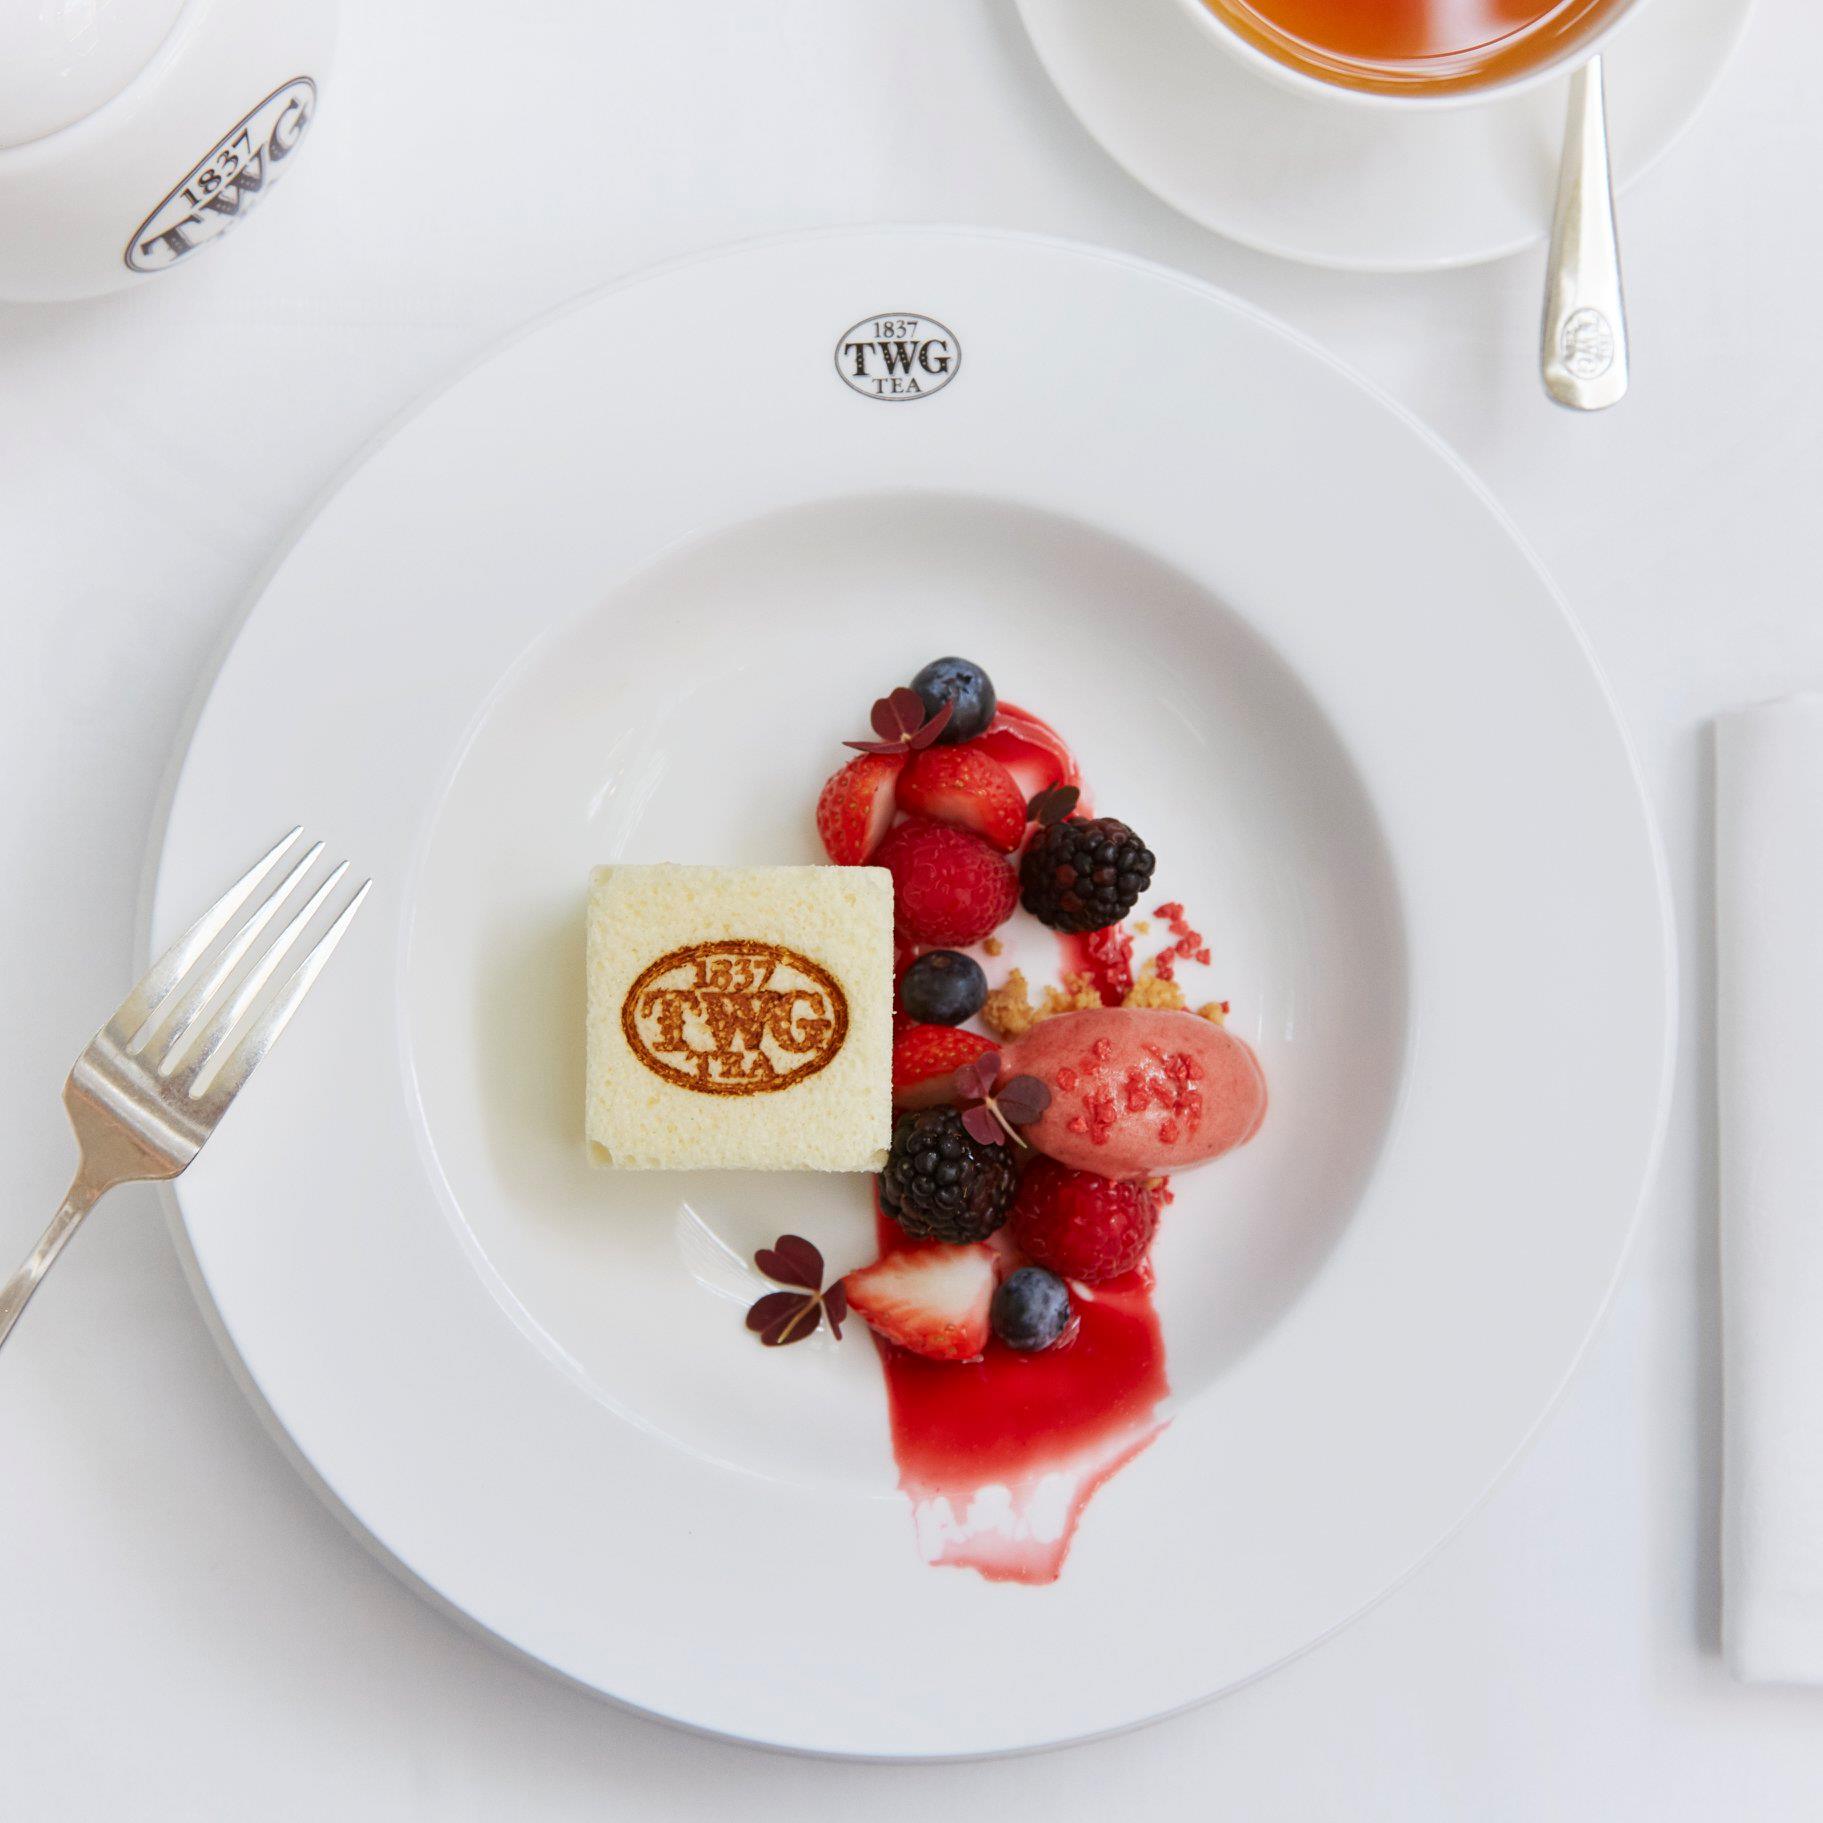 Indulge in TWG Tea light Japanese cheese cake served with summer berries and a scoop of Timeless Tea sorbet on this week's Set Menu.